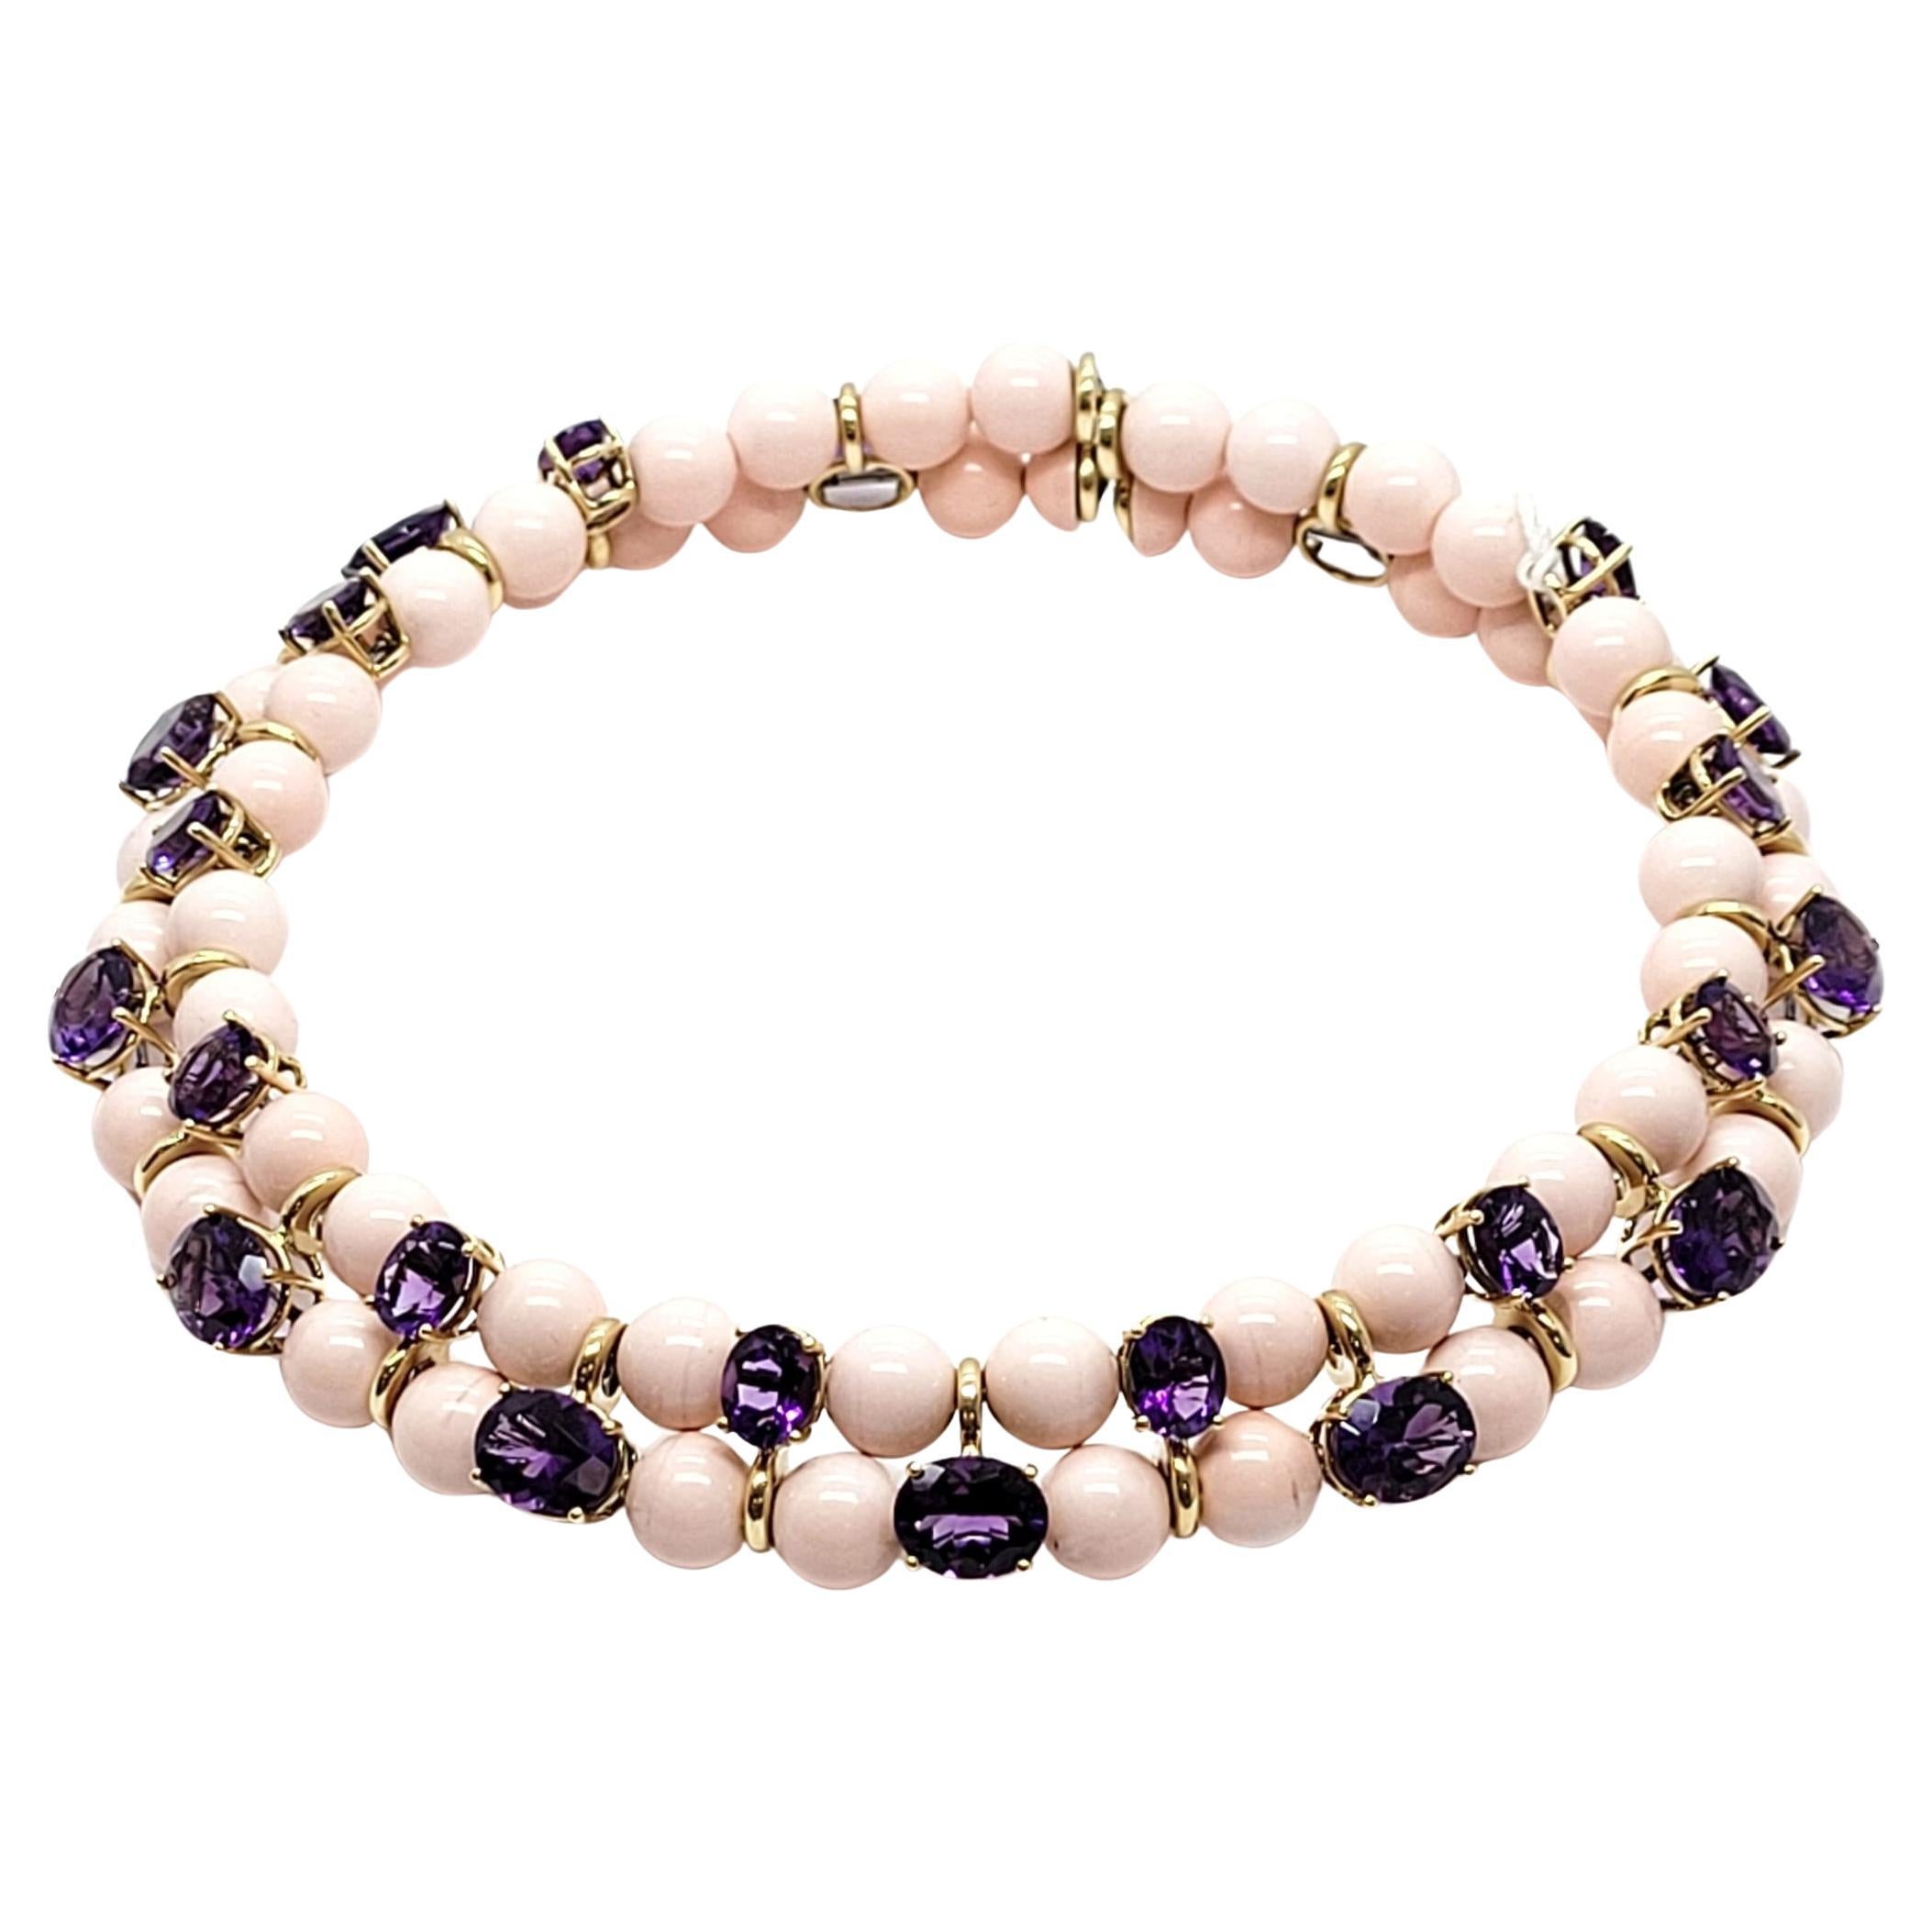 Andreoli 49.94 Carat Amethyst Coral 18 Karat Yellow Gold Choker Necklace For Sale